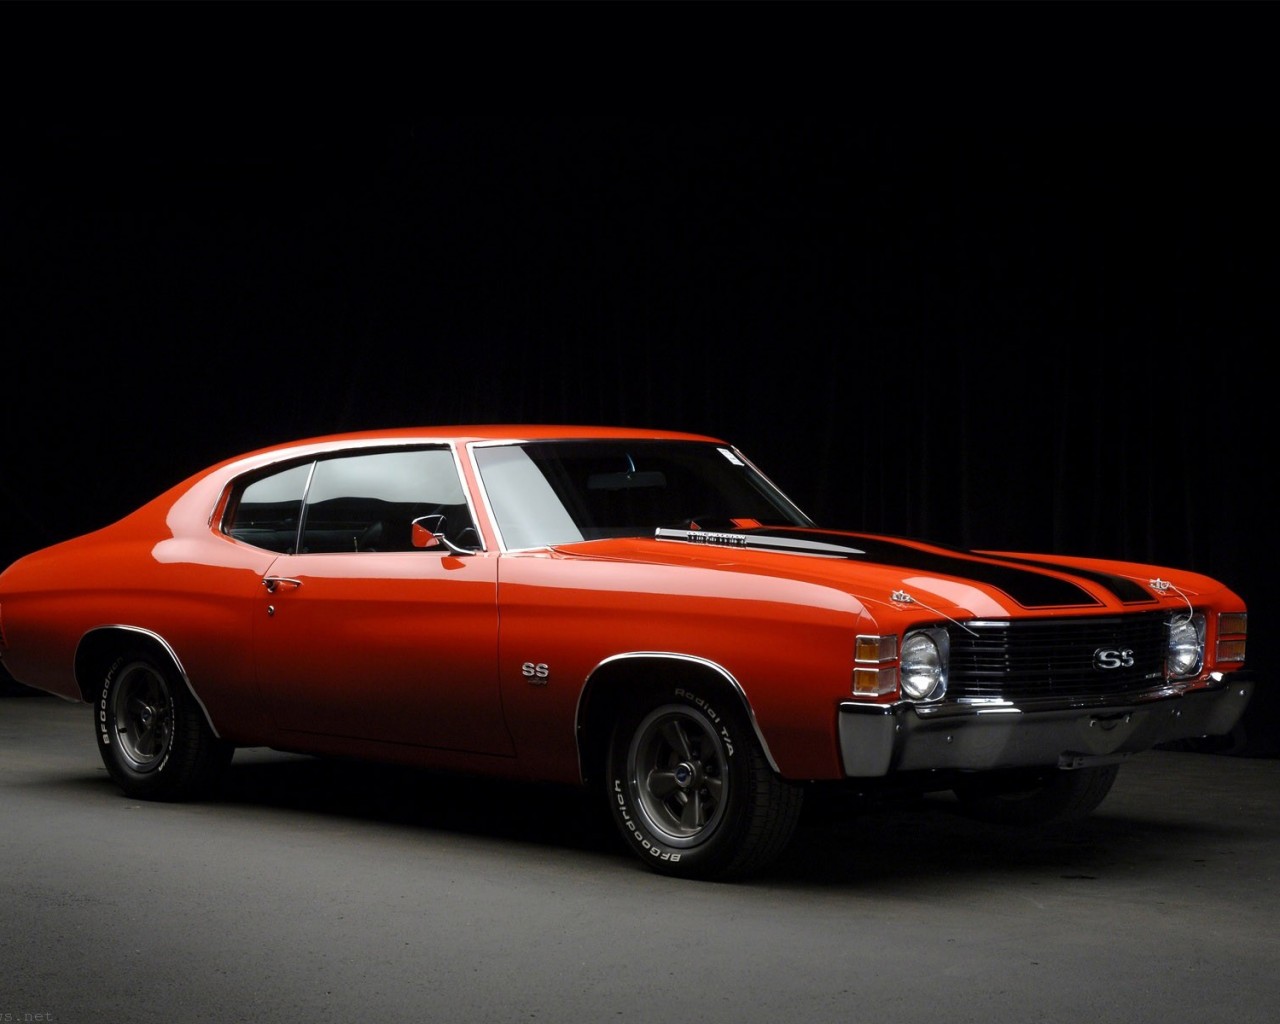 Chevy Muscle Car Wallpaper 4220 Hd Wallpapers in Cars   Imagescicom